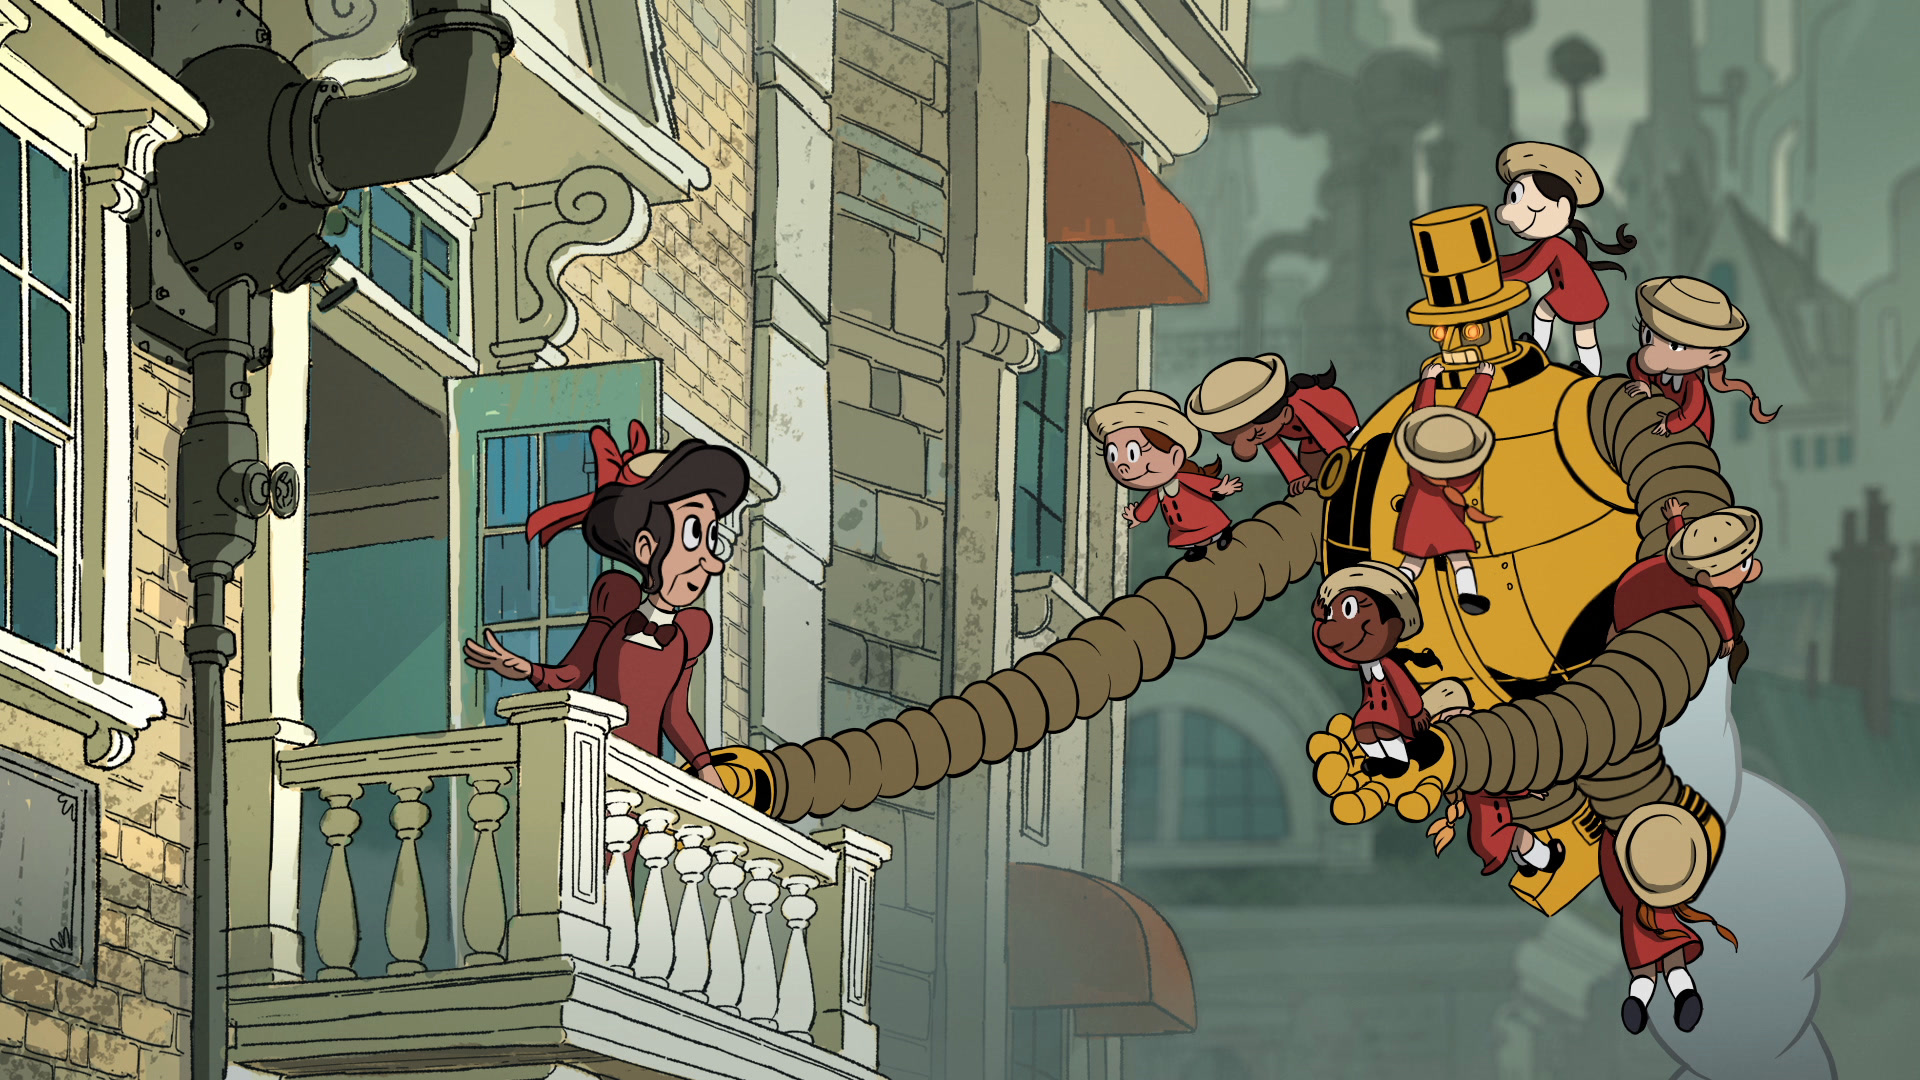 A group of schoolchildren are safely escorted back to their teacher by Copernicus, a bronze steampunk robot in a top hat with long extendable arms in Unicorn: Warriors Eternal.